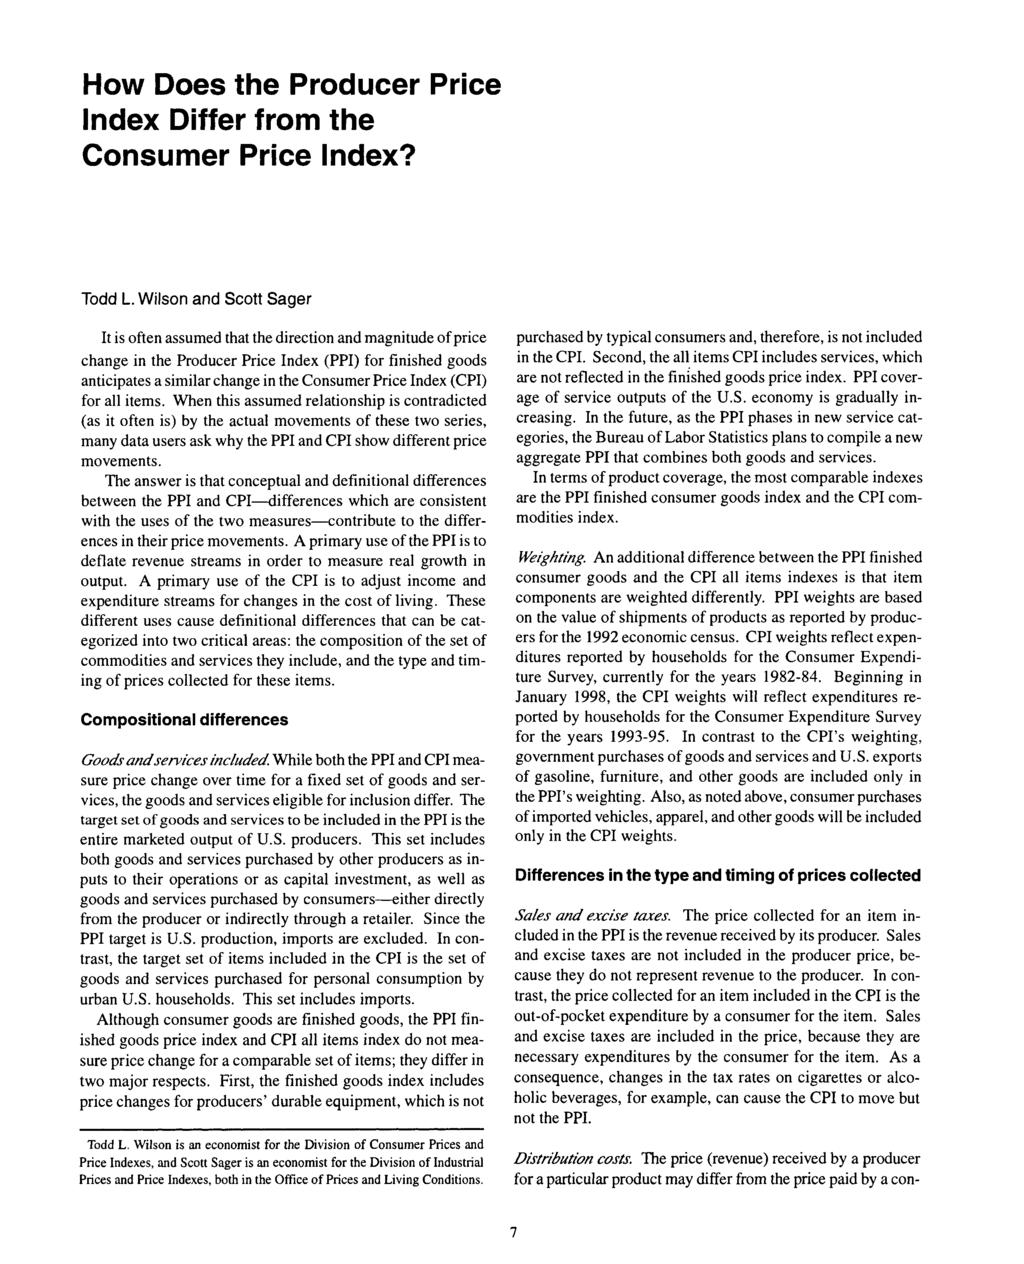 How Does the Producer Price Differ from the Consumer Price? Todd L.